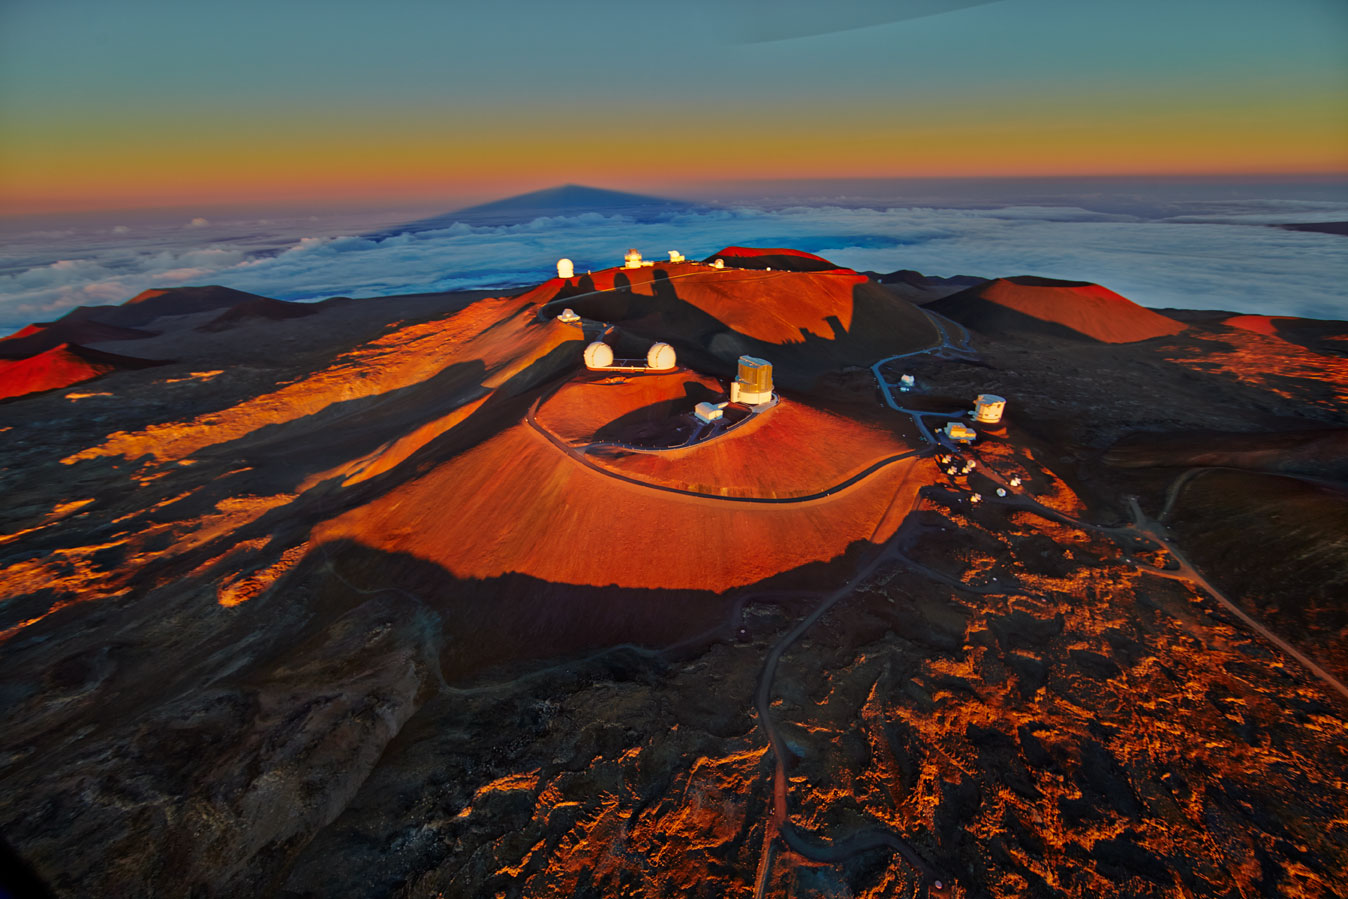 An aerial view of observatories and telescopes on a mountaintop in a very orange sunset at Mauna Kea, Hawai'i